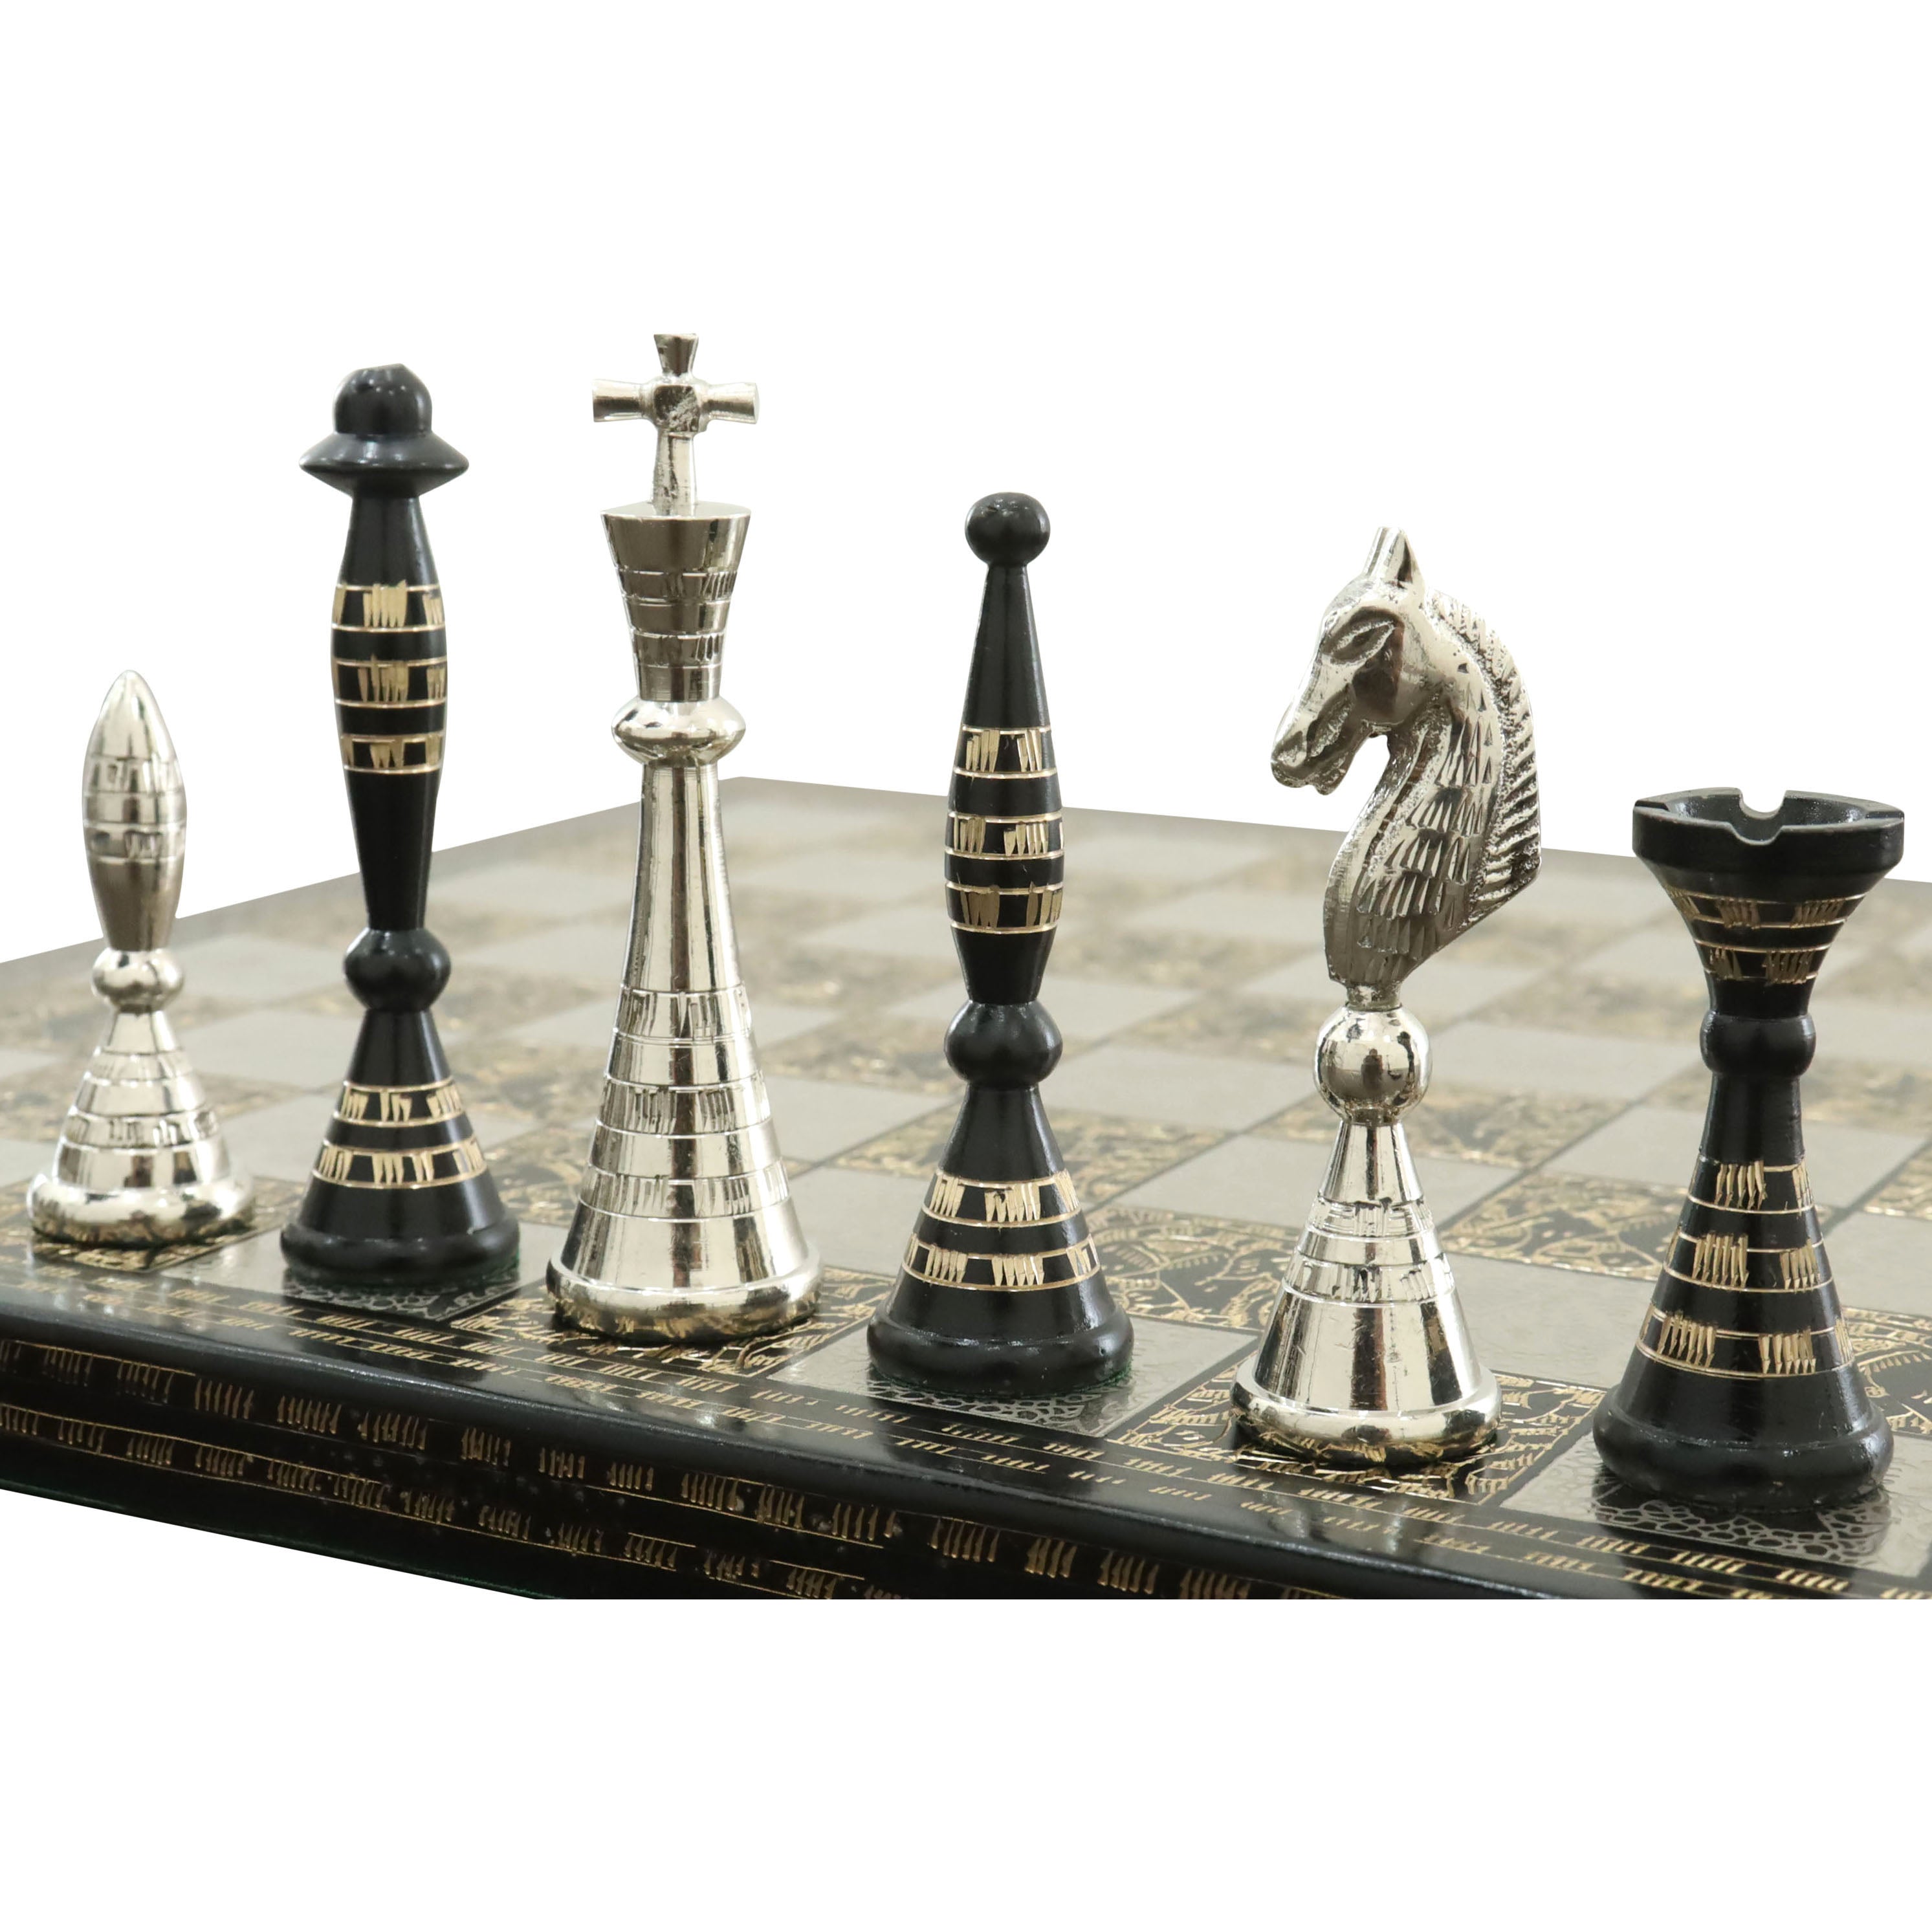 Unique Chess Board With Metal Chess Pieces Hand Crafted Wooden 